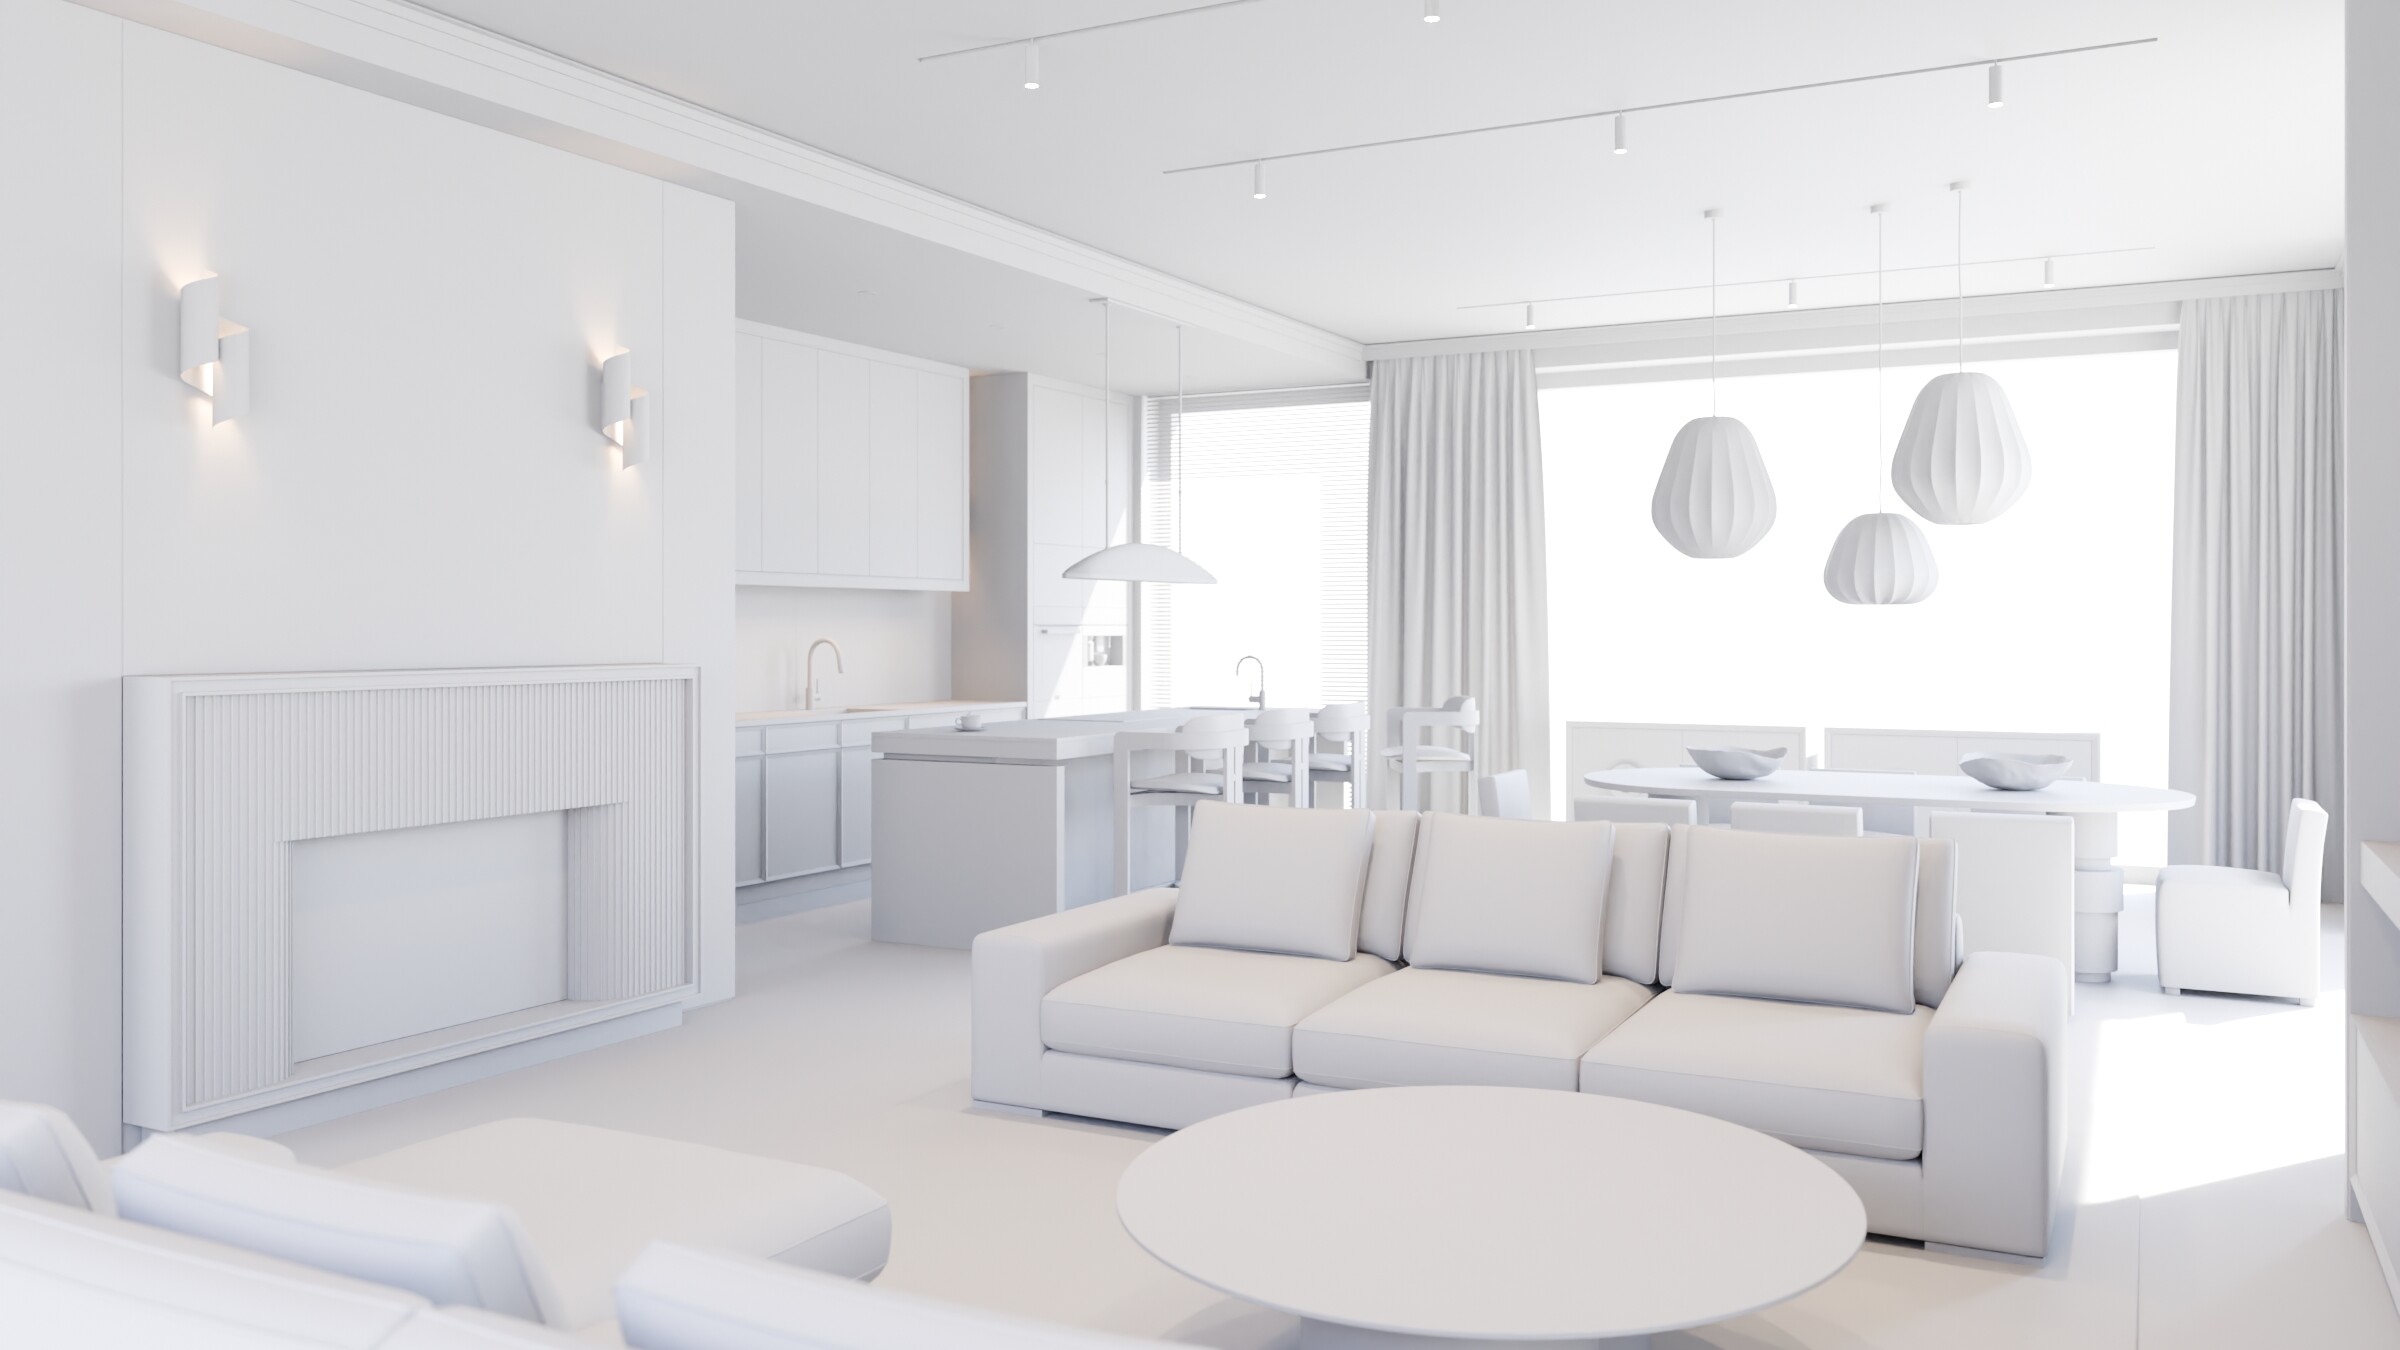 Early 3D Conceptual rendering of living room